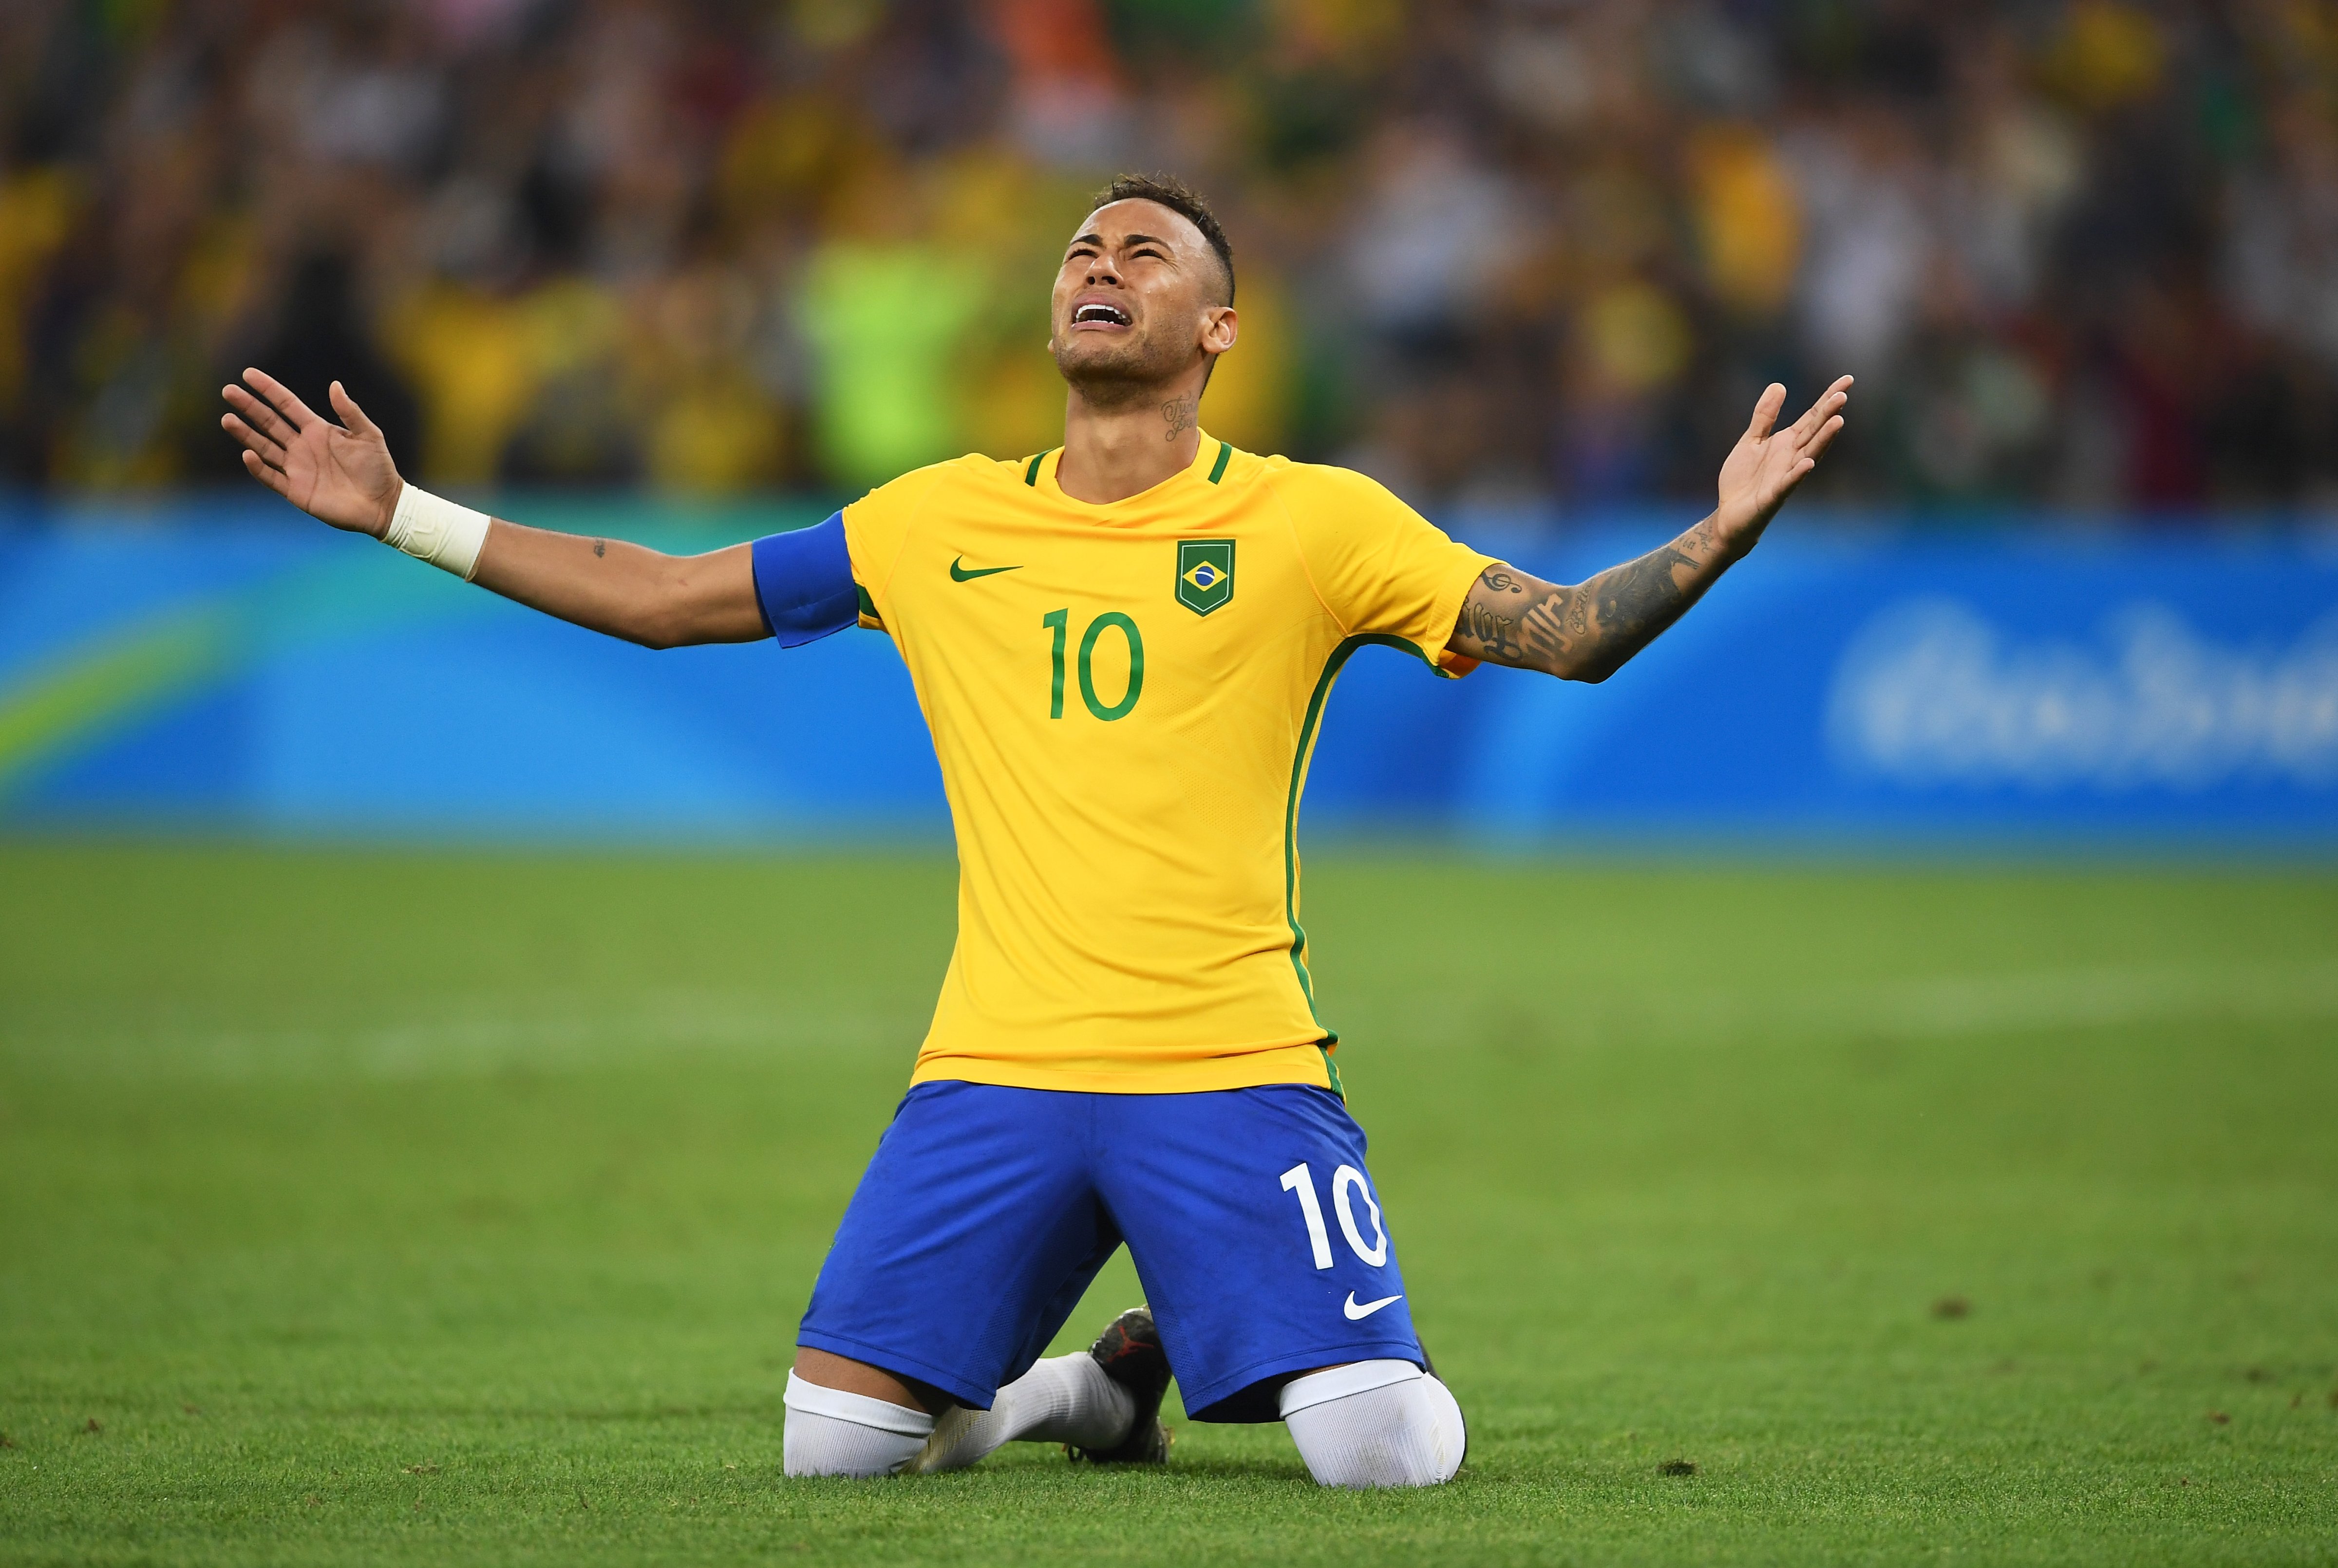 Neymar of Brazil celebrates scoring the winning penalty in the penalty shoot out during the Men's Football Final between Brazil and Germany at the Maracana Stadium on Day 15 of the Rio 2016 Olympic Games on Aug. 20, 2016 in Rio de Janeiro, Brazil. (Laurence Griffiths—Getty Images)